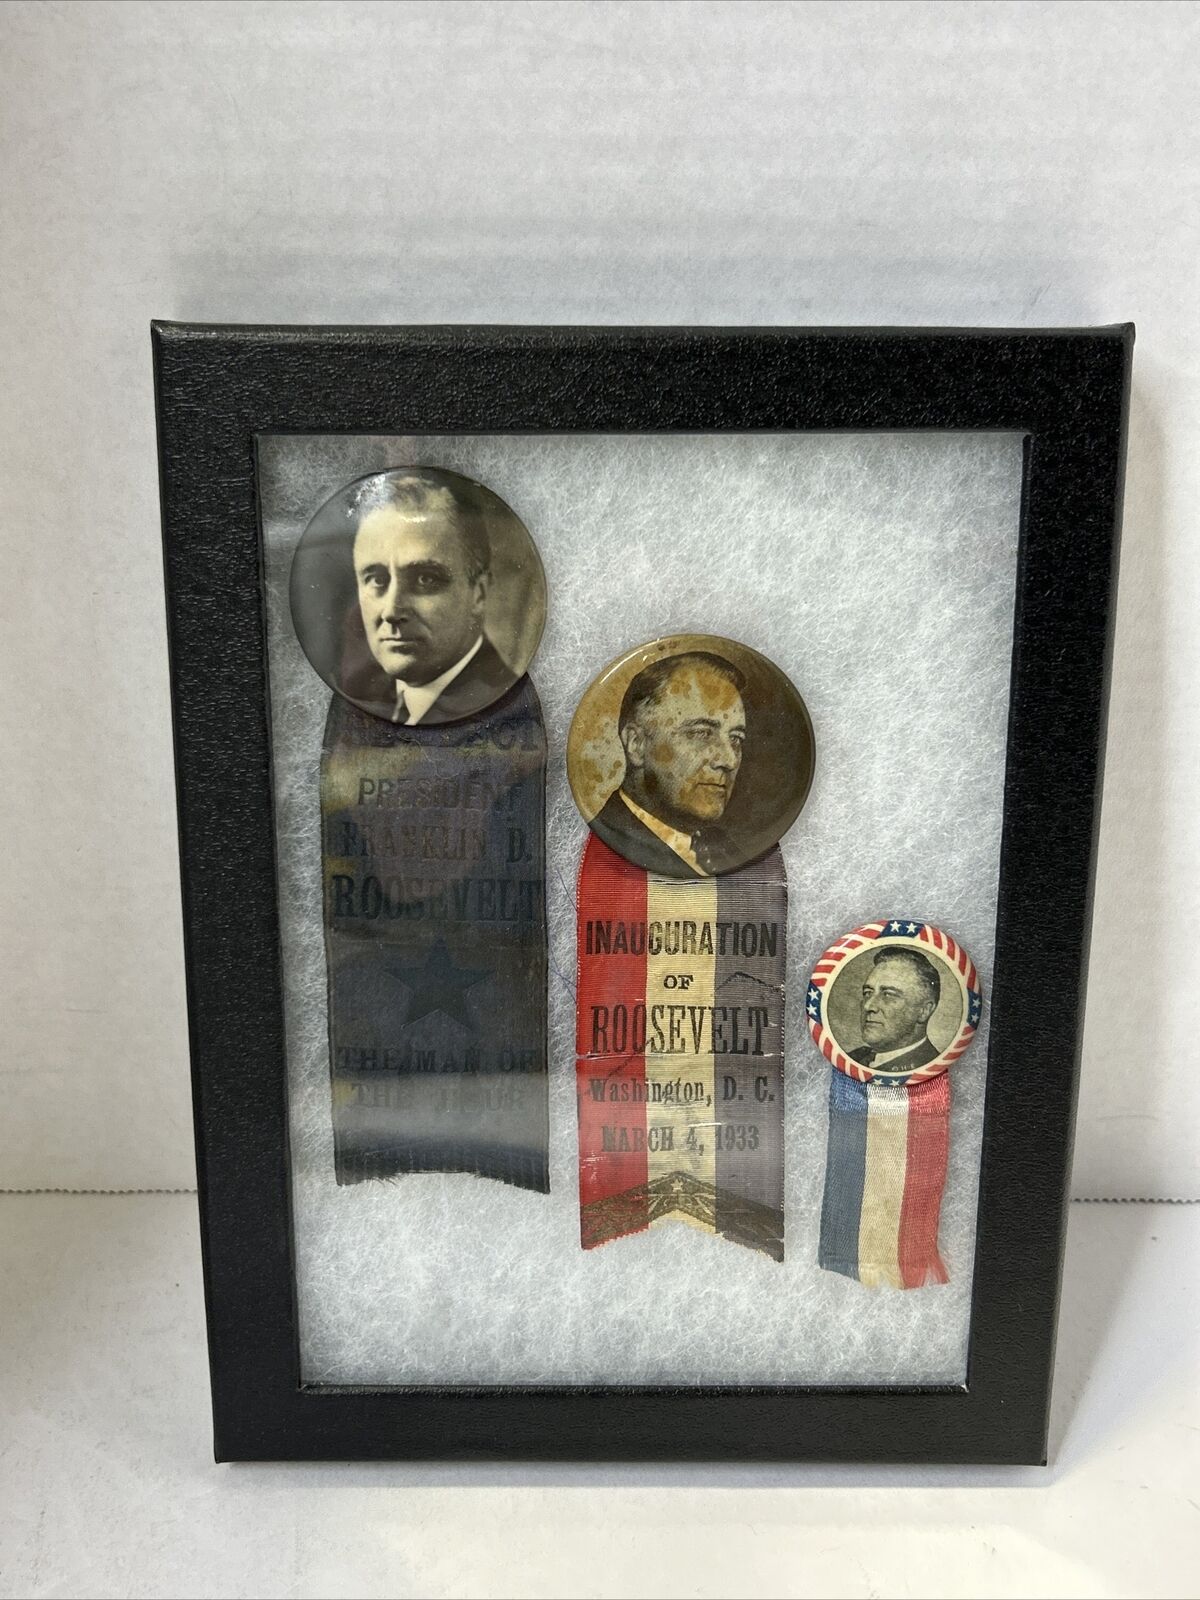 1933 Franklin D Roosevelt Inauguration Election Medal Button Ribbons RARE